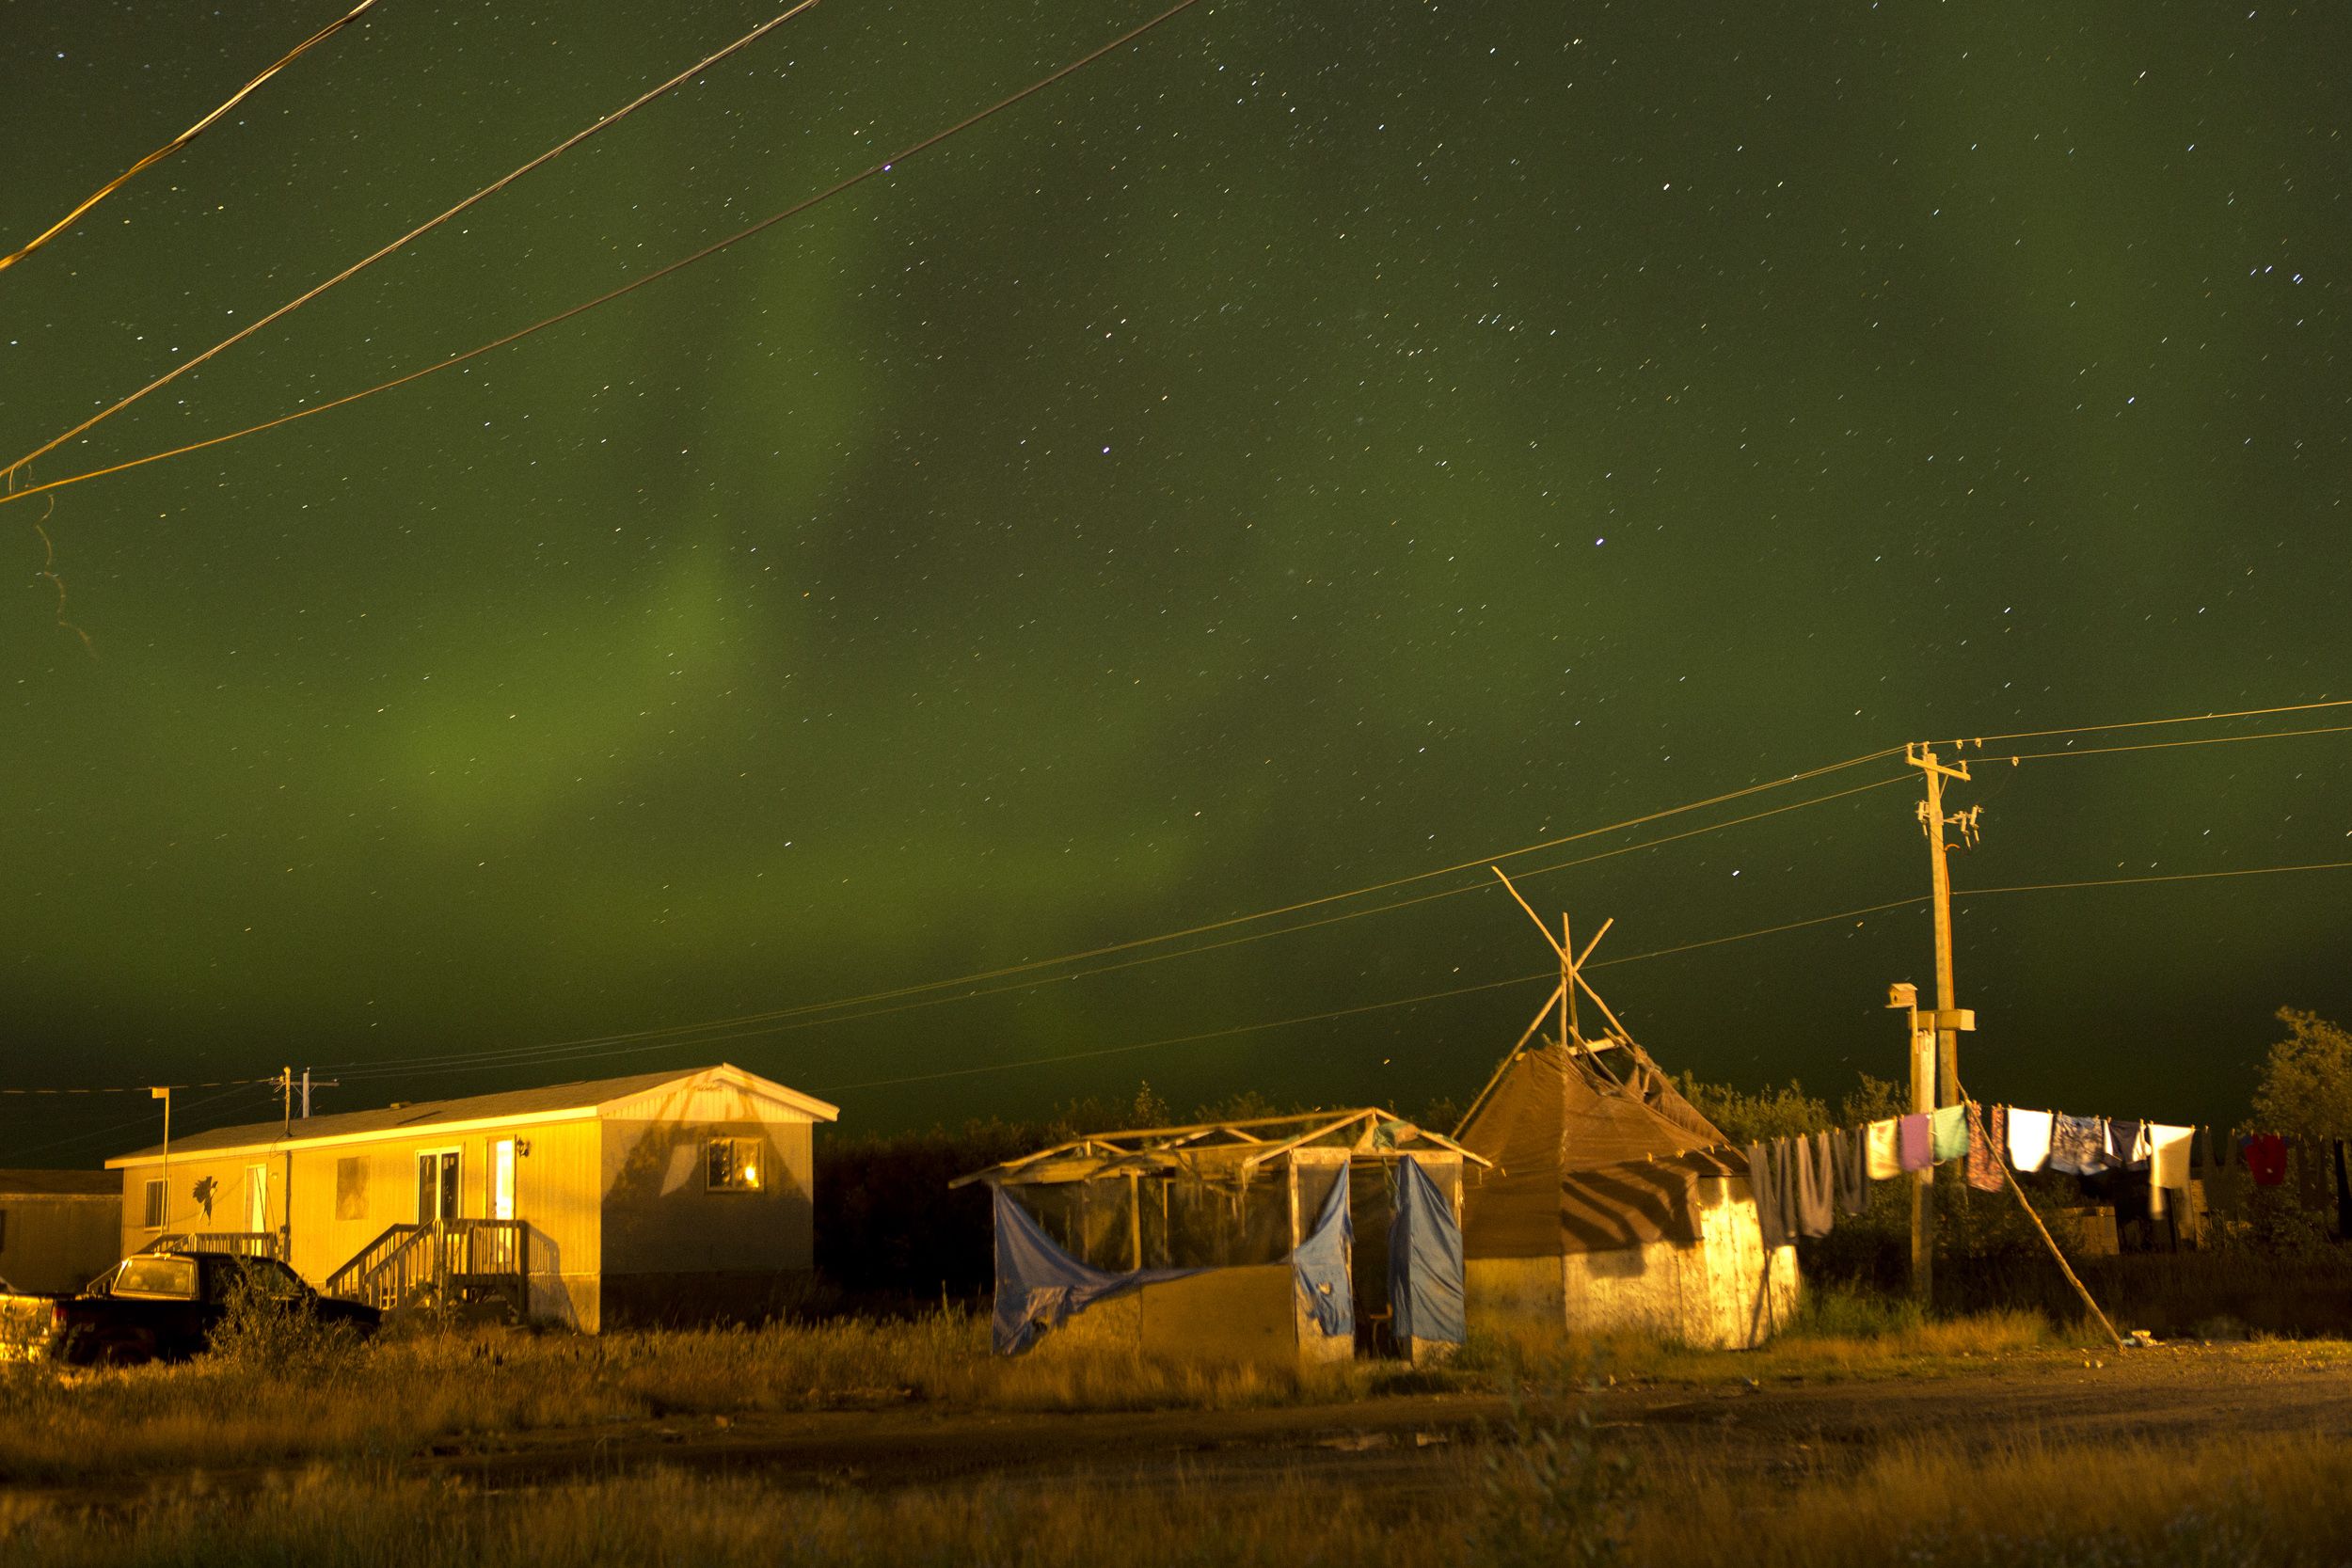 The Northern Lights fill the night sky over Attawapiskat. It is said that when Cree are living the right way and conducting ceremonies and dances, the spirits of Cree ancestors celebrate in the heavens. Image by David Maurice Smith/Oculi. Canada, 2016.
